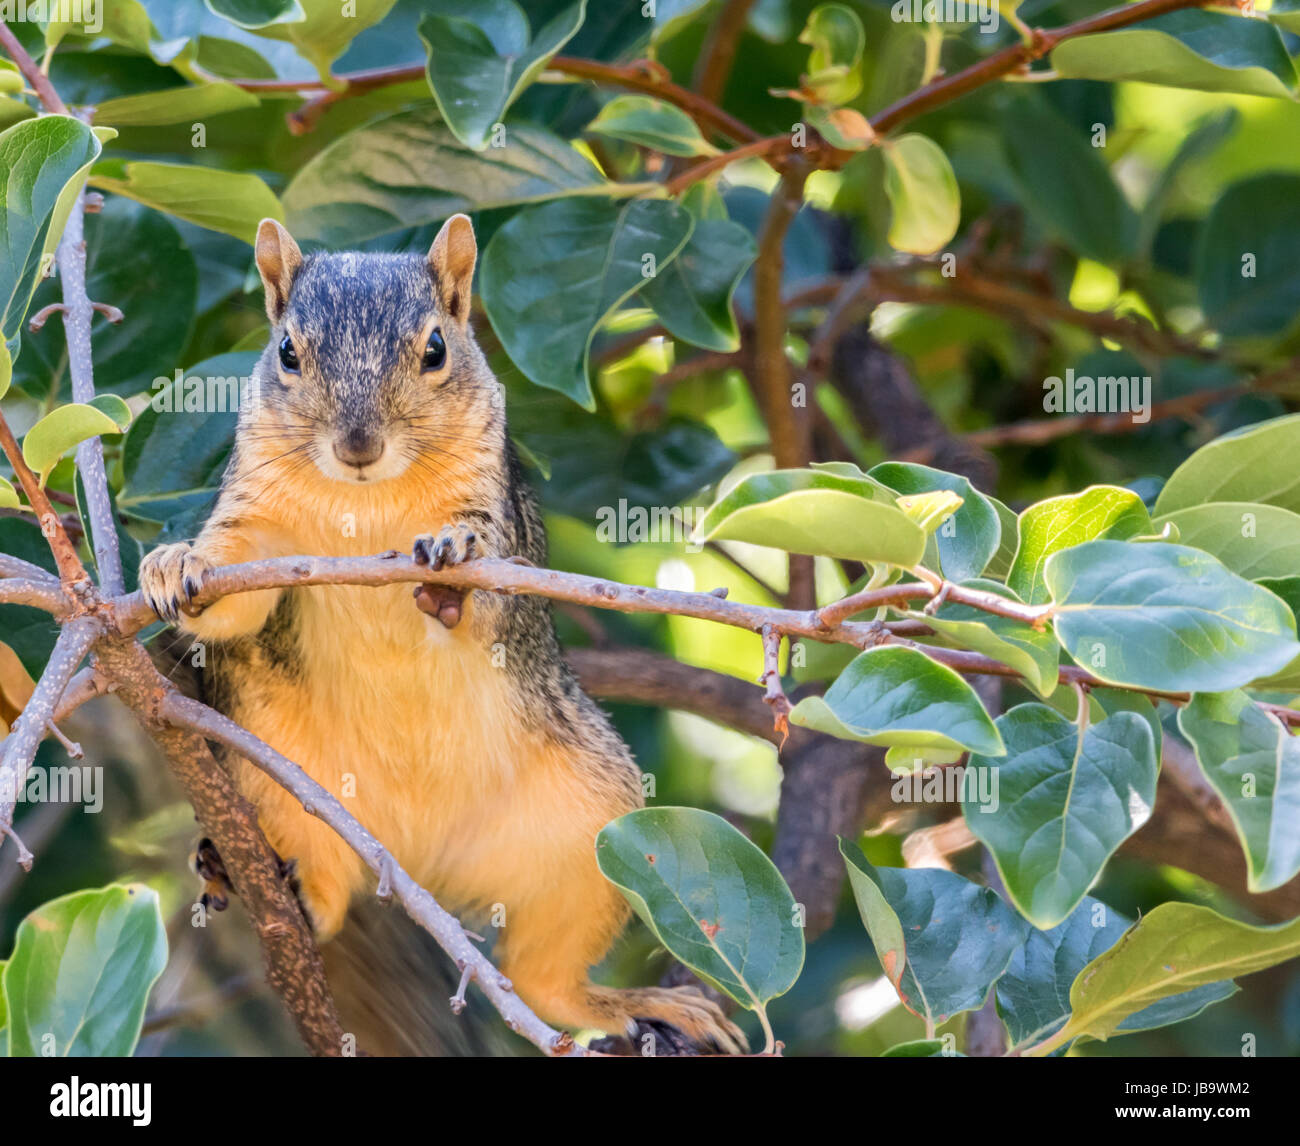 A little Fox Squirrel grips a branch and observes his surroundings Stock Photo